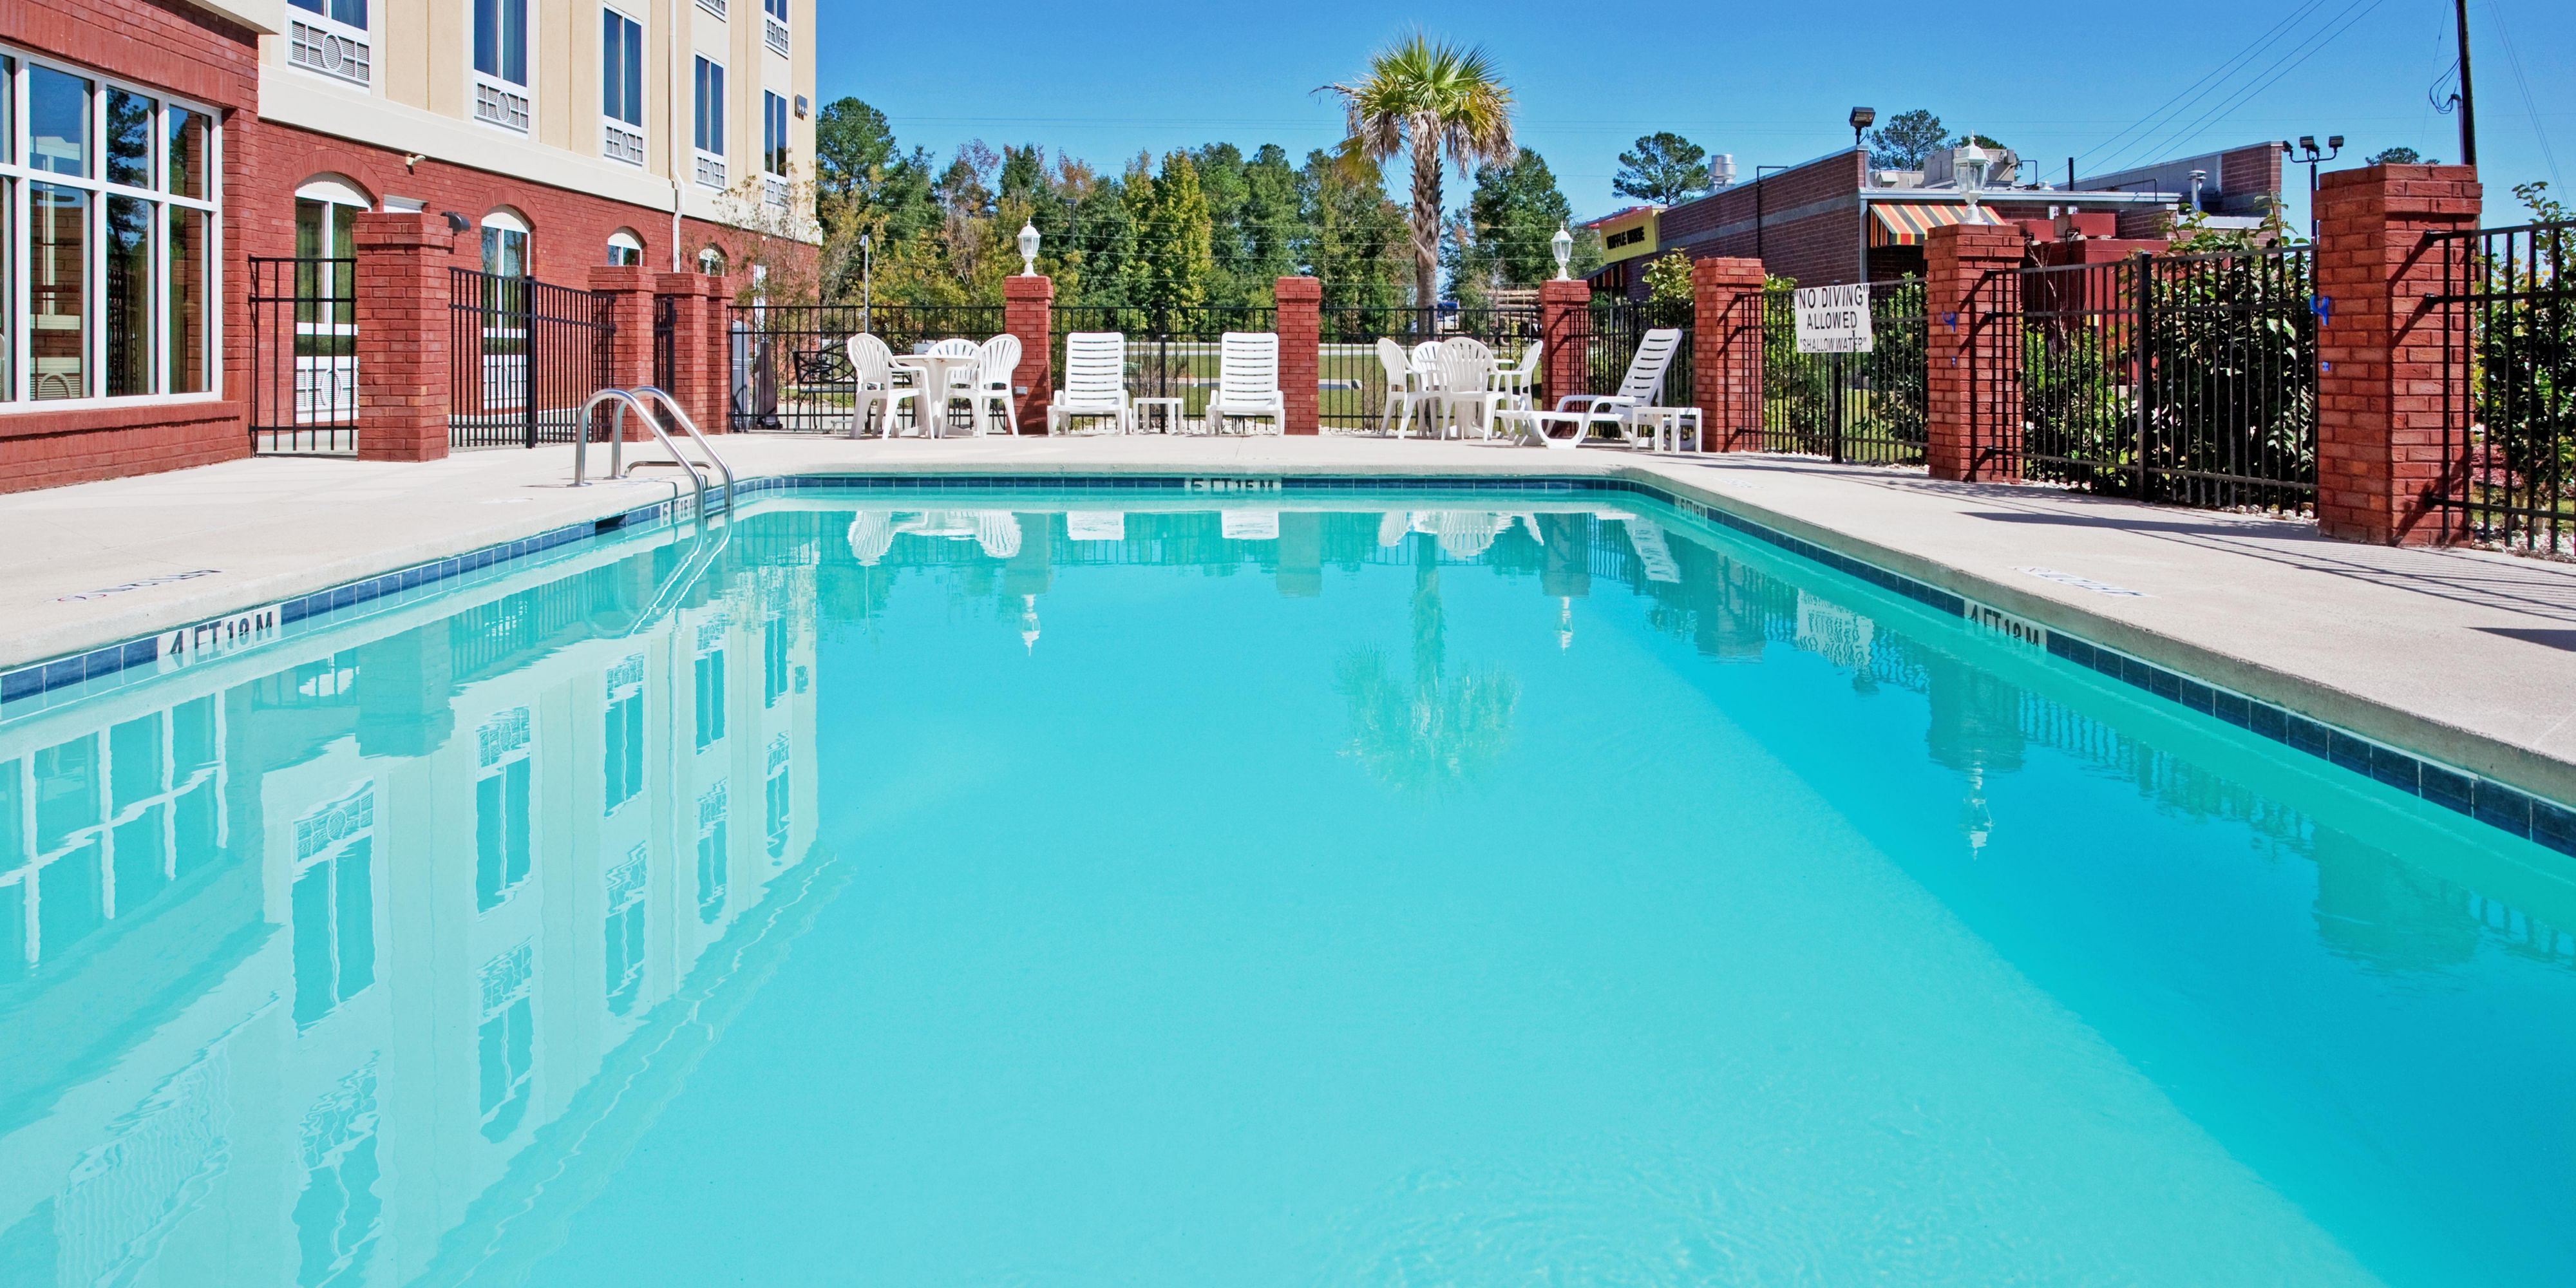 Refreshing Outdoor Pool. Great way to relax during your stay!